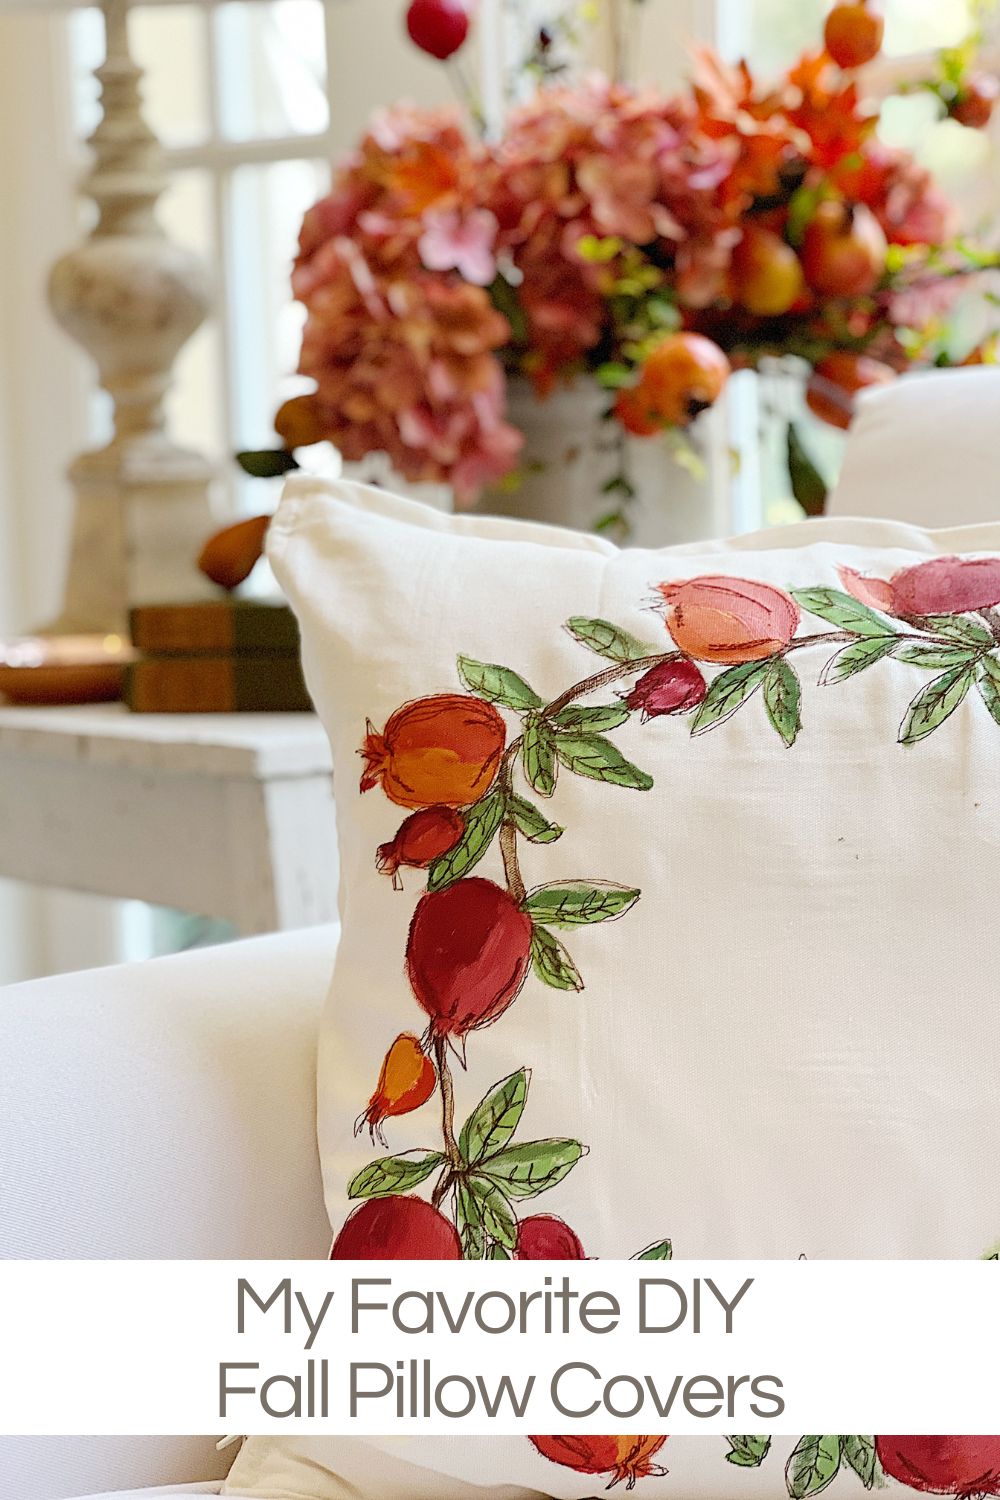 It is officially the end of summer, so let's decorate for fall! Fall pillow covers are an easy way to shift the seasons.